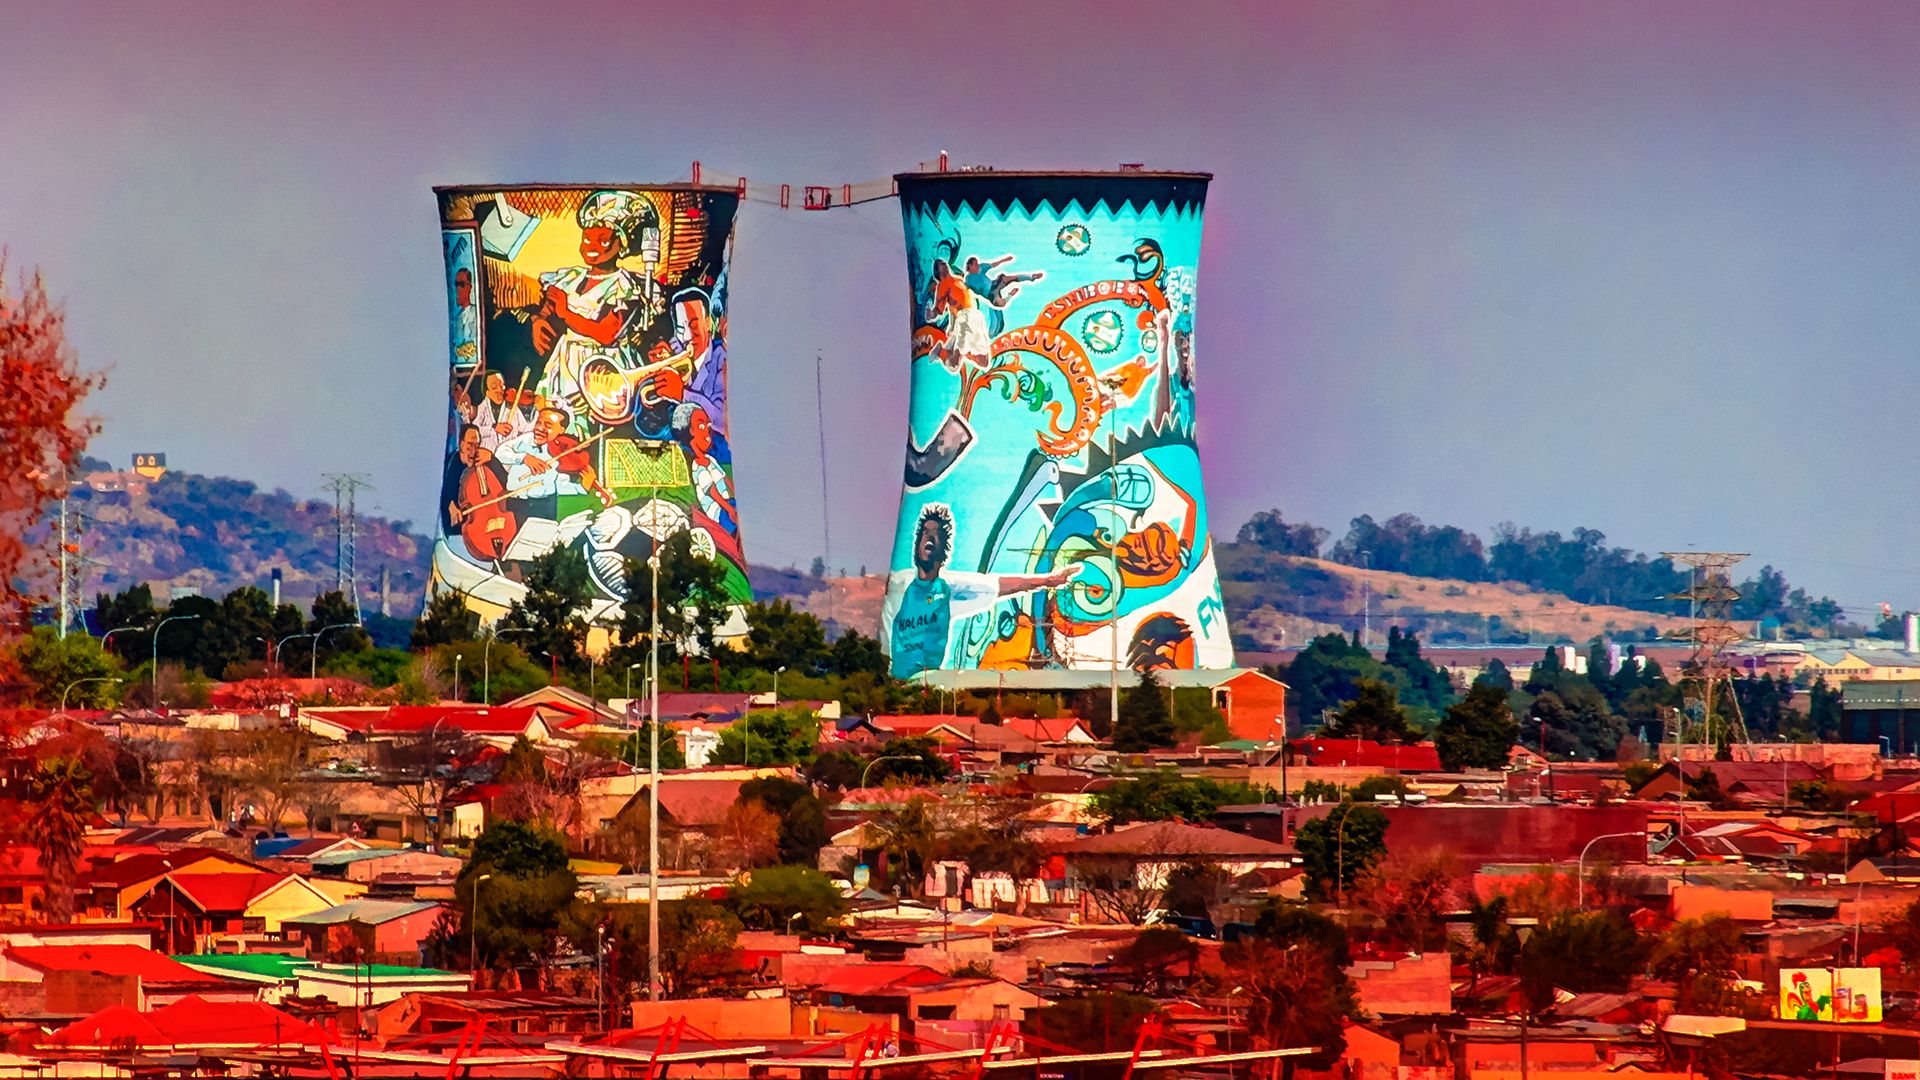 soweto towers